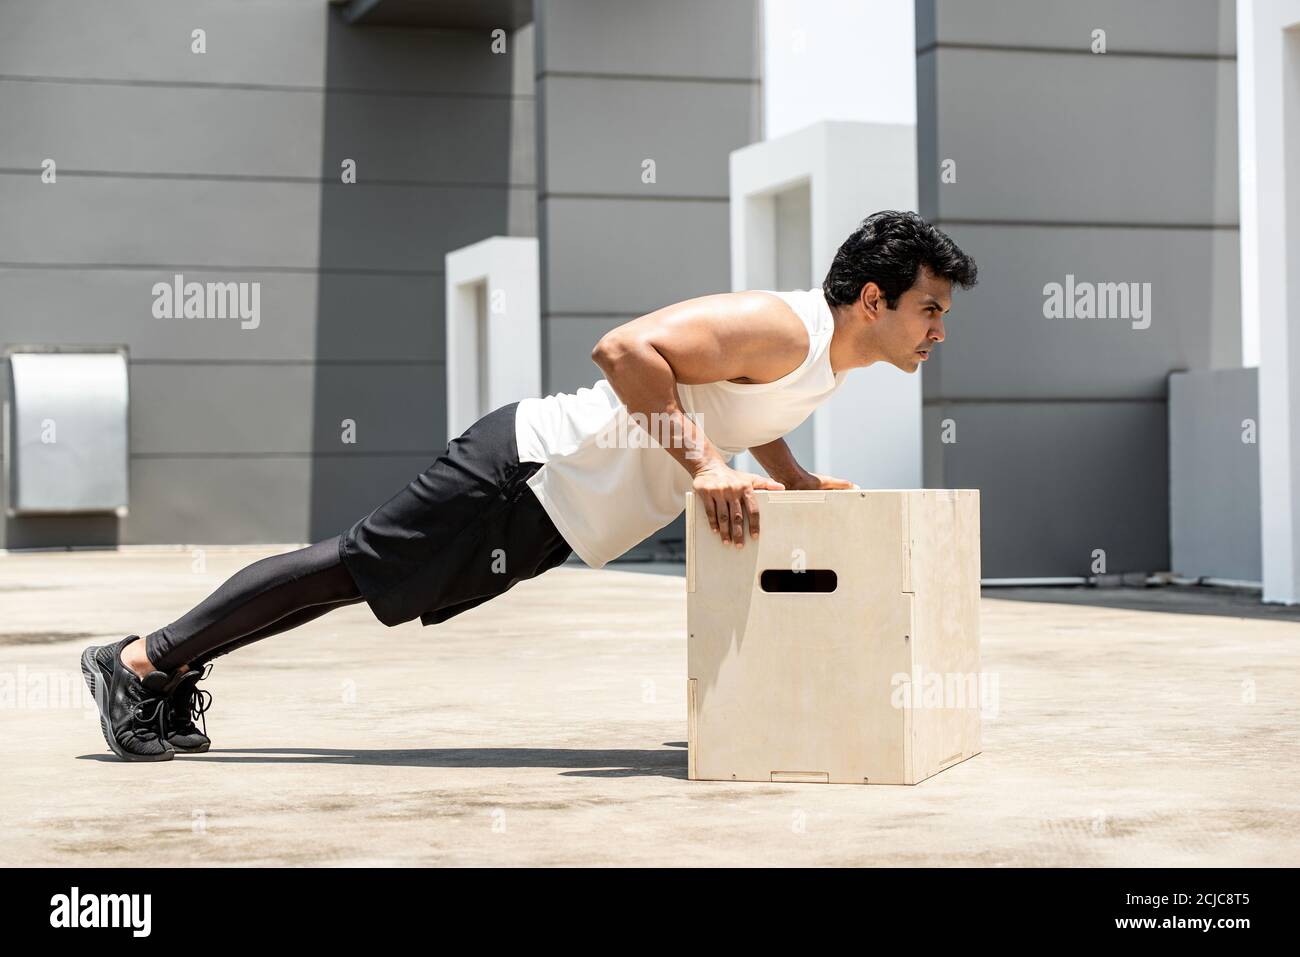 Handsome Indian sports man doing push up exercise outdoors on building rooftop, home workout in the open air concept Stock Photo